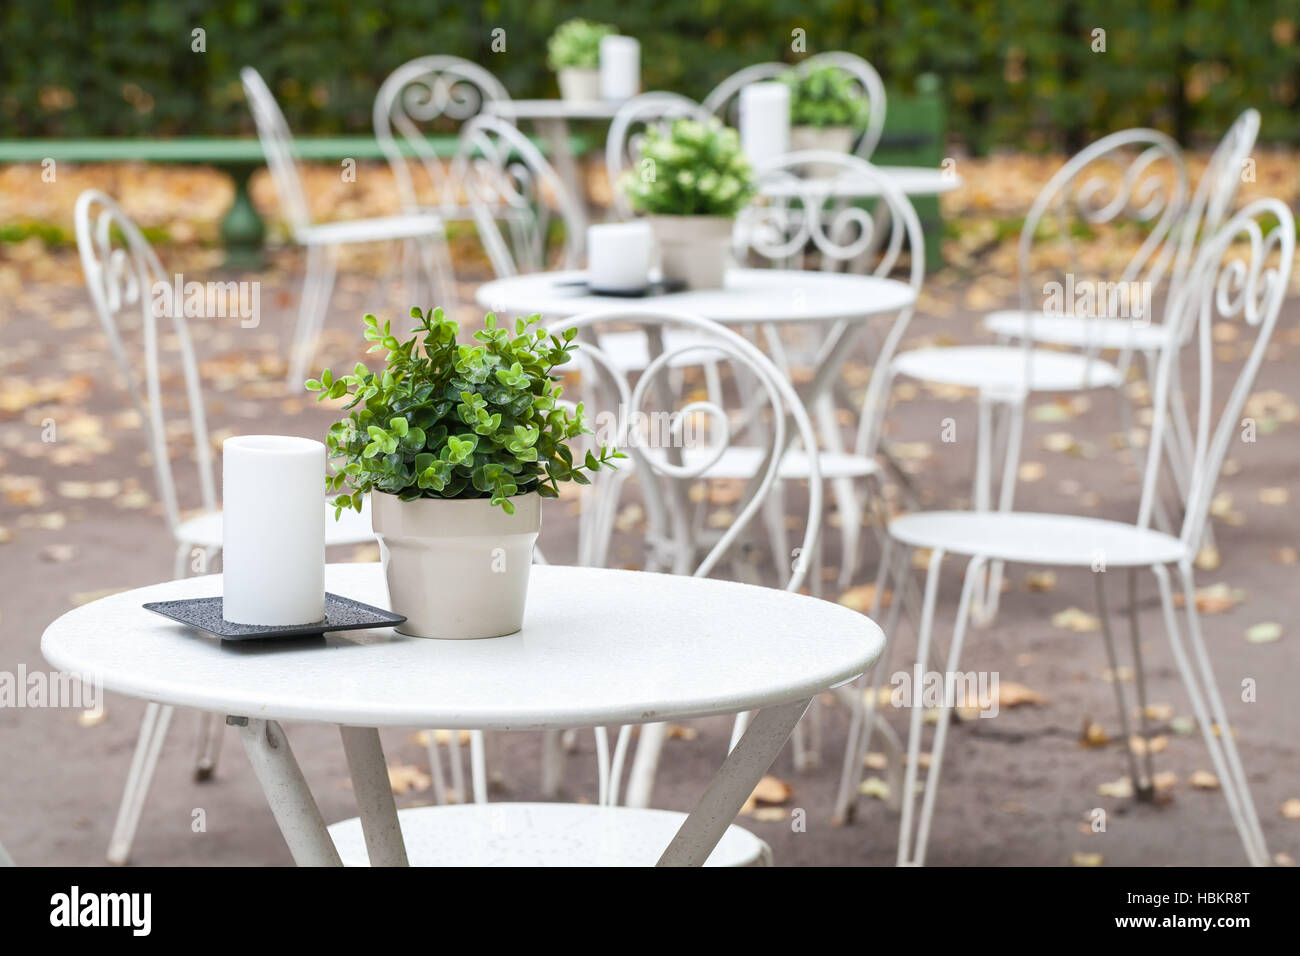 Outdoor cafeteria background interior, metal white chairs and tables with decorative green plants in pots and candles Stock Photo